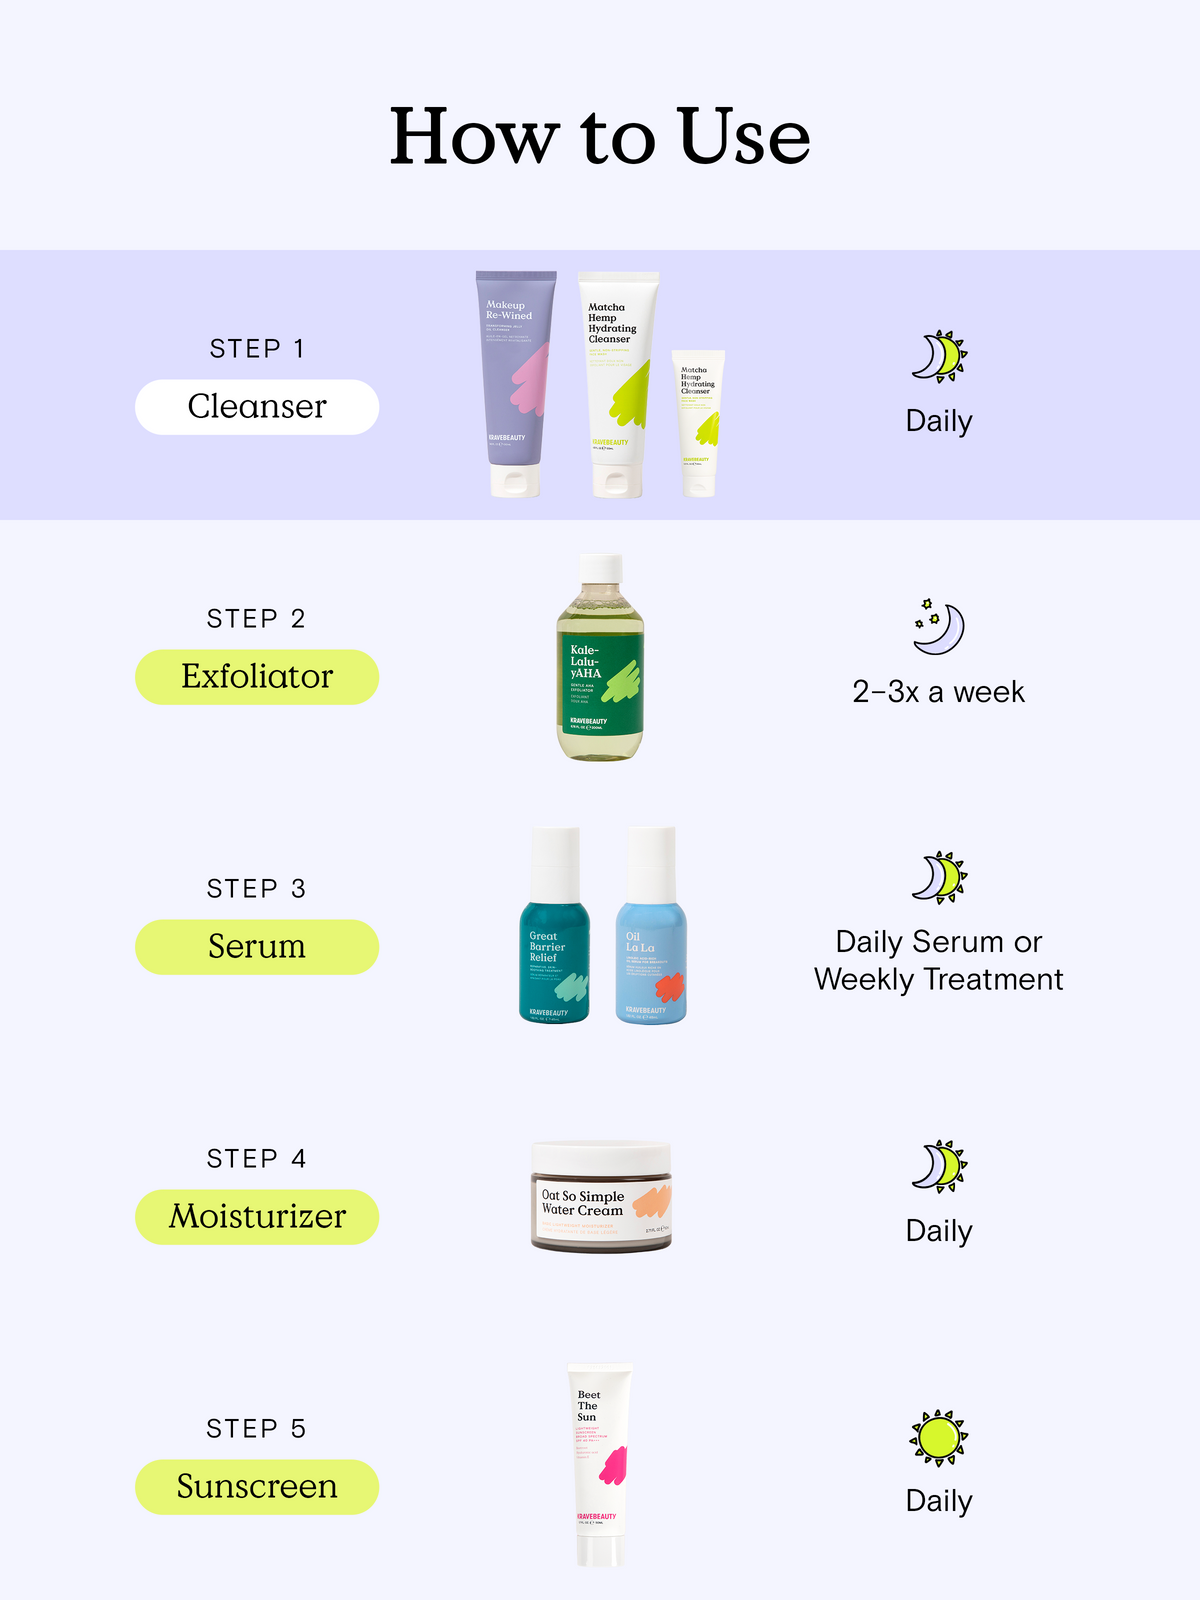 How to use Mini Matcha Hemp Hydrating Cleanser in your skincare routine. Step 1 use Makeup Re-wined Oil Cleanser and Mini Matcha Hemp Hydrating Cleanser as double cleanse daily. Step 2, use Kale-Lalu-yAHA Exfoliator two to three times a week. Step 3, use Great Barrier Relief Serum as a daily serum or weekly treatment. Step 4, use Oat So Simple Water Cream as a daily moisturizer. Step 5 use Beet The Sun SPF 40 PA+++ sunscreen daily. #size_1.01 oz / 30 ml